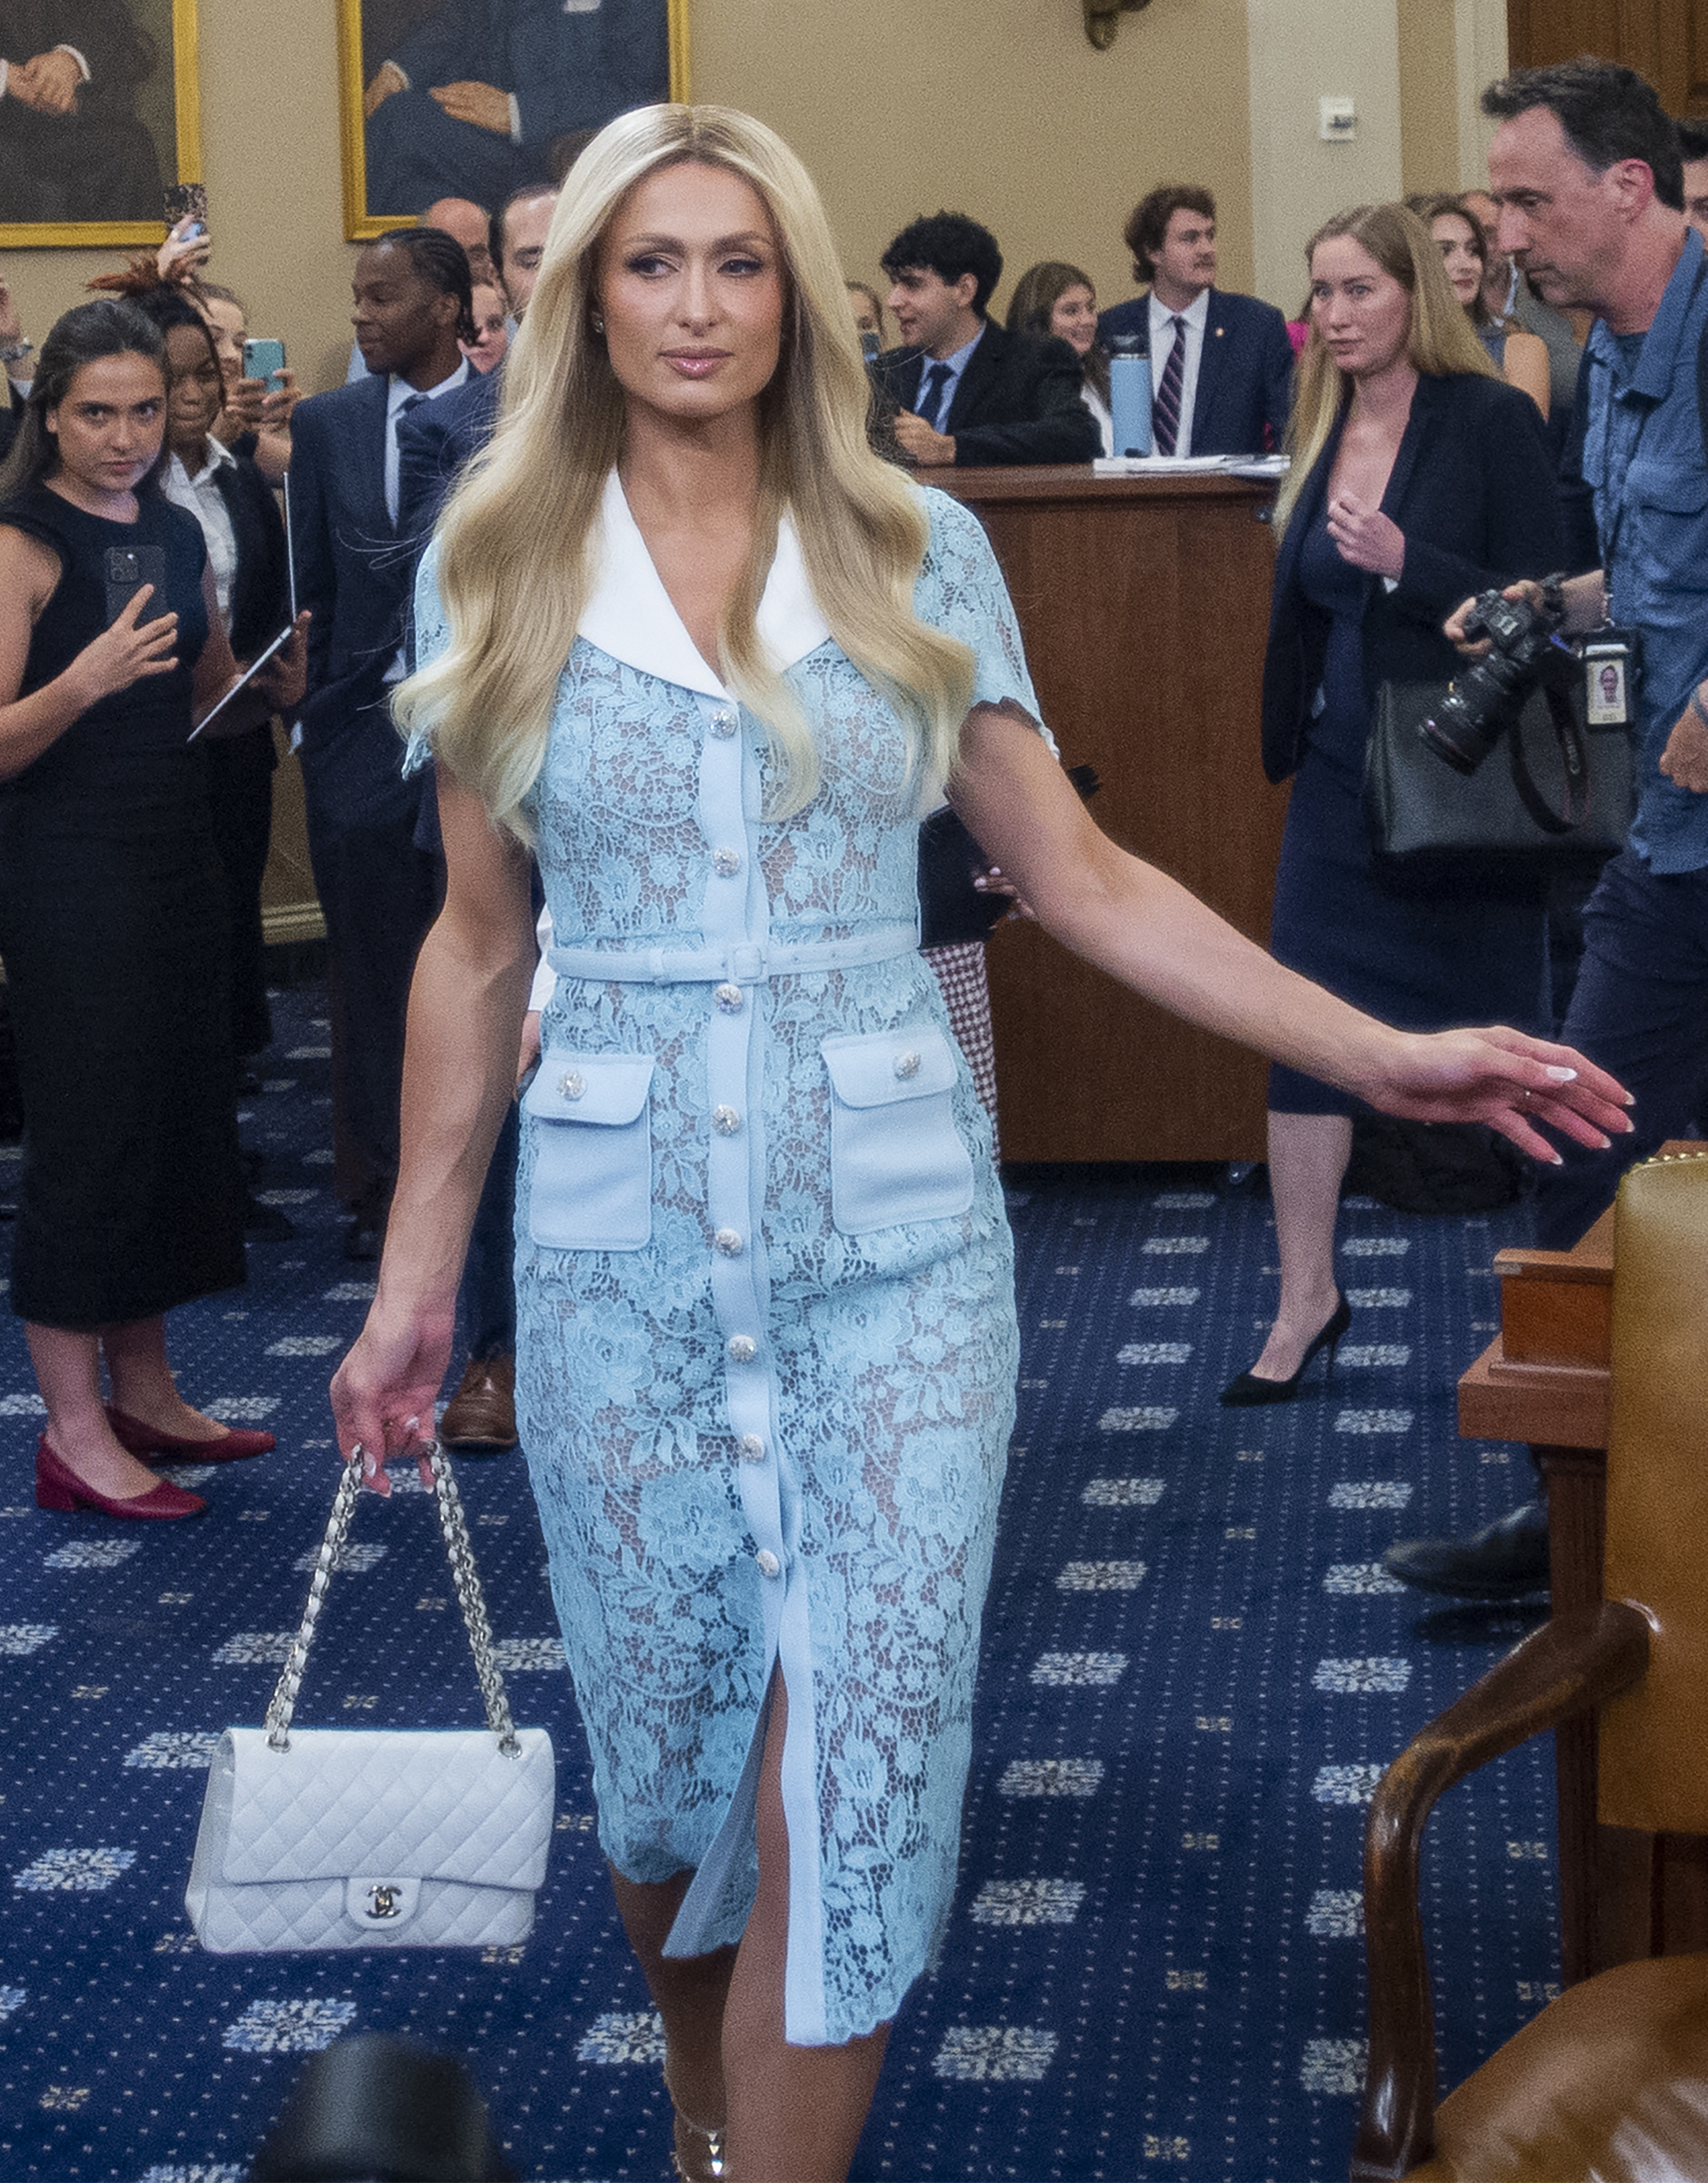 Paris Hilton in Washington D.C. attending a hearing about 'Strengthening Child Welfare and Protecting America's Children'